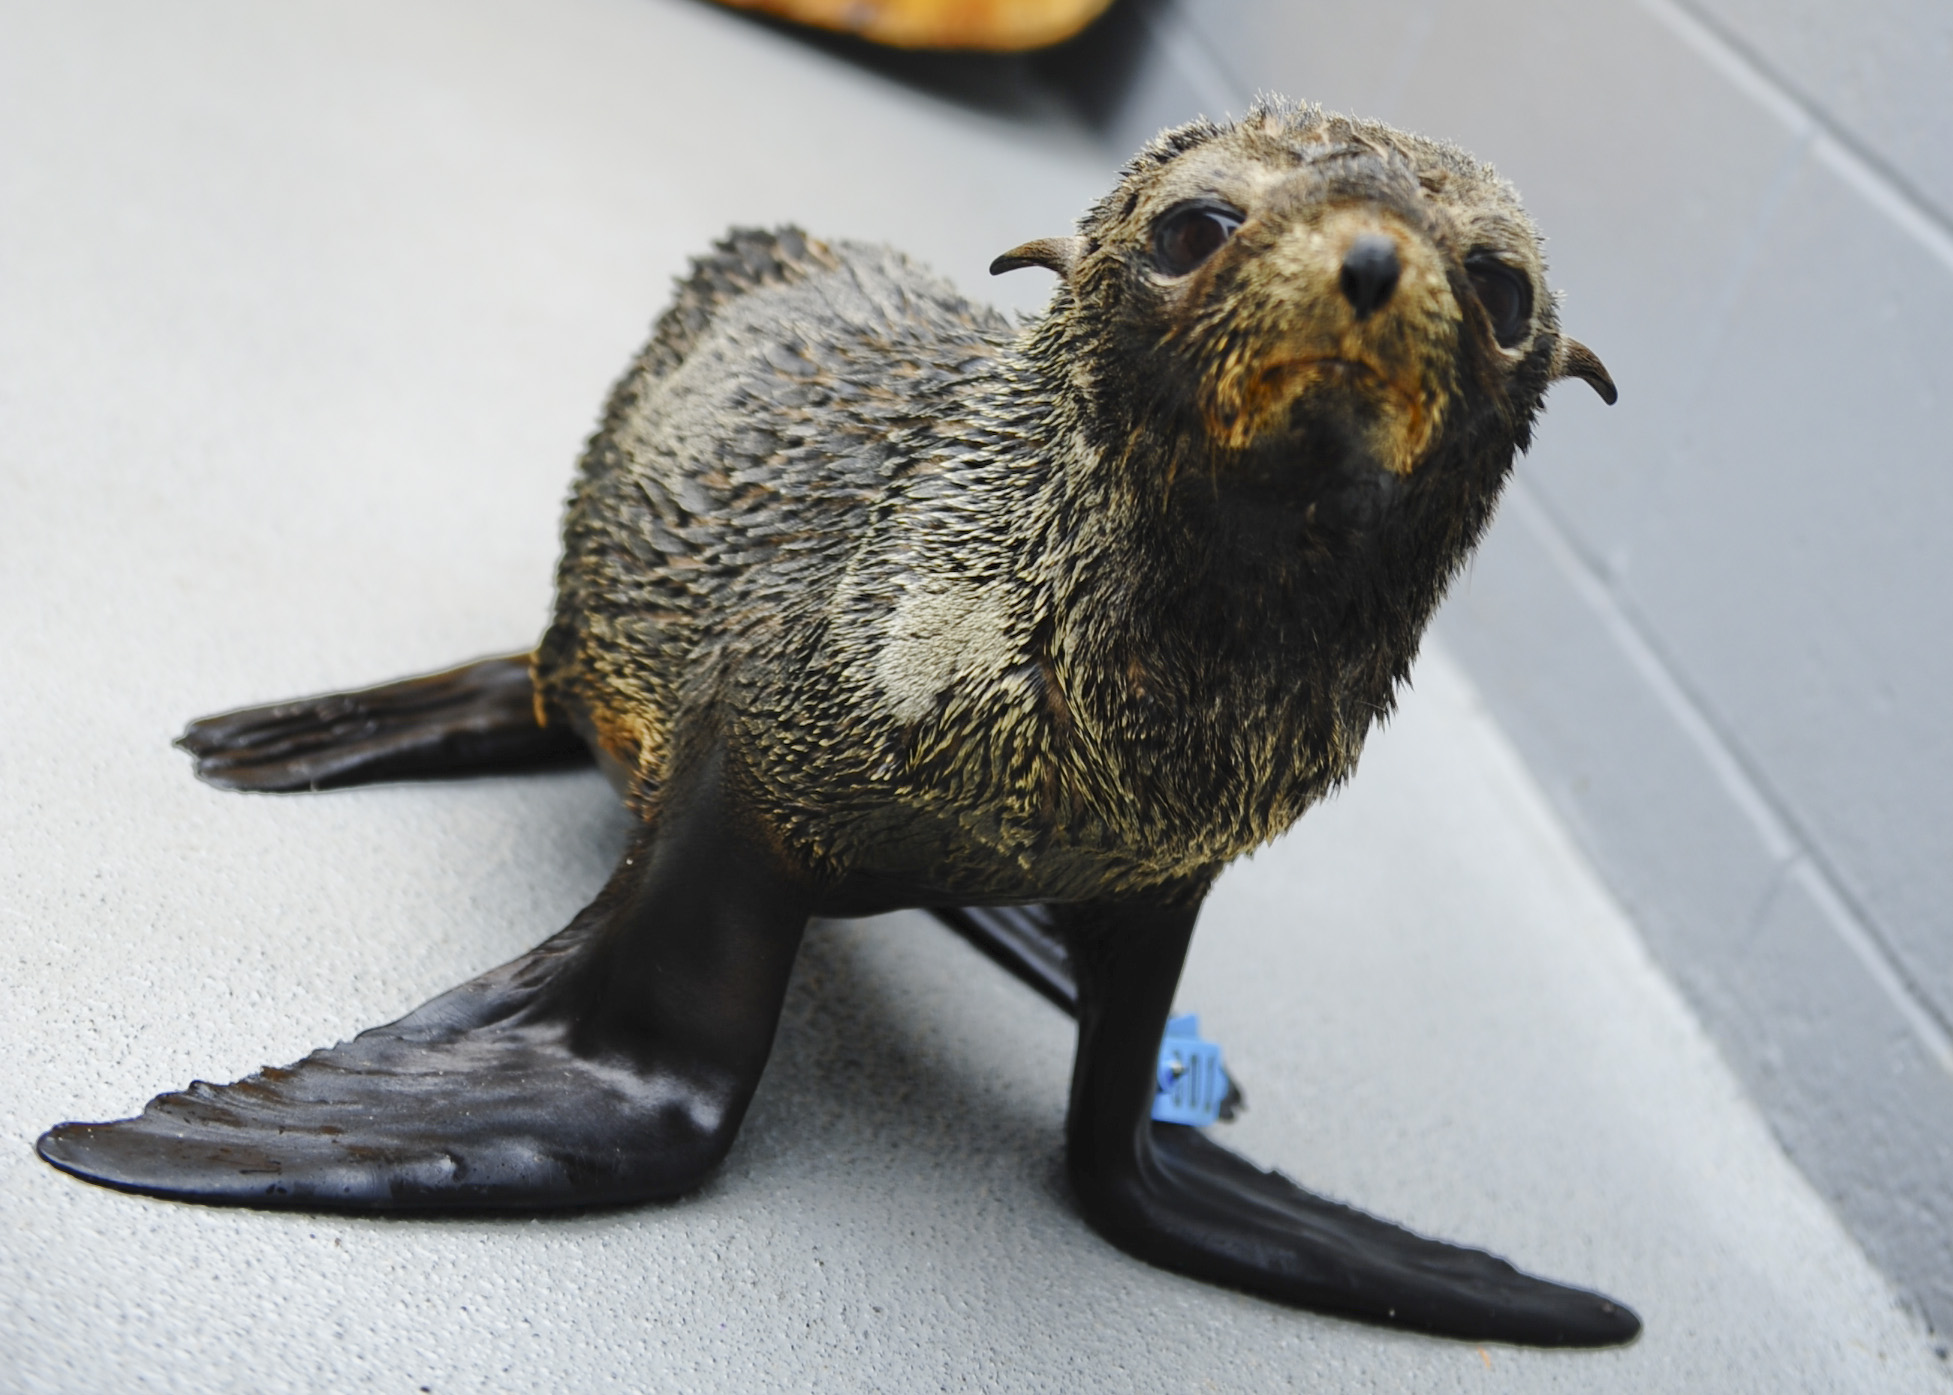 A malnourished Guadalupe fur seal pup is pictured at the Marine Mammal Center, a Bay Area facility that rehabilitates stranded marine animals. (Dana Angus)